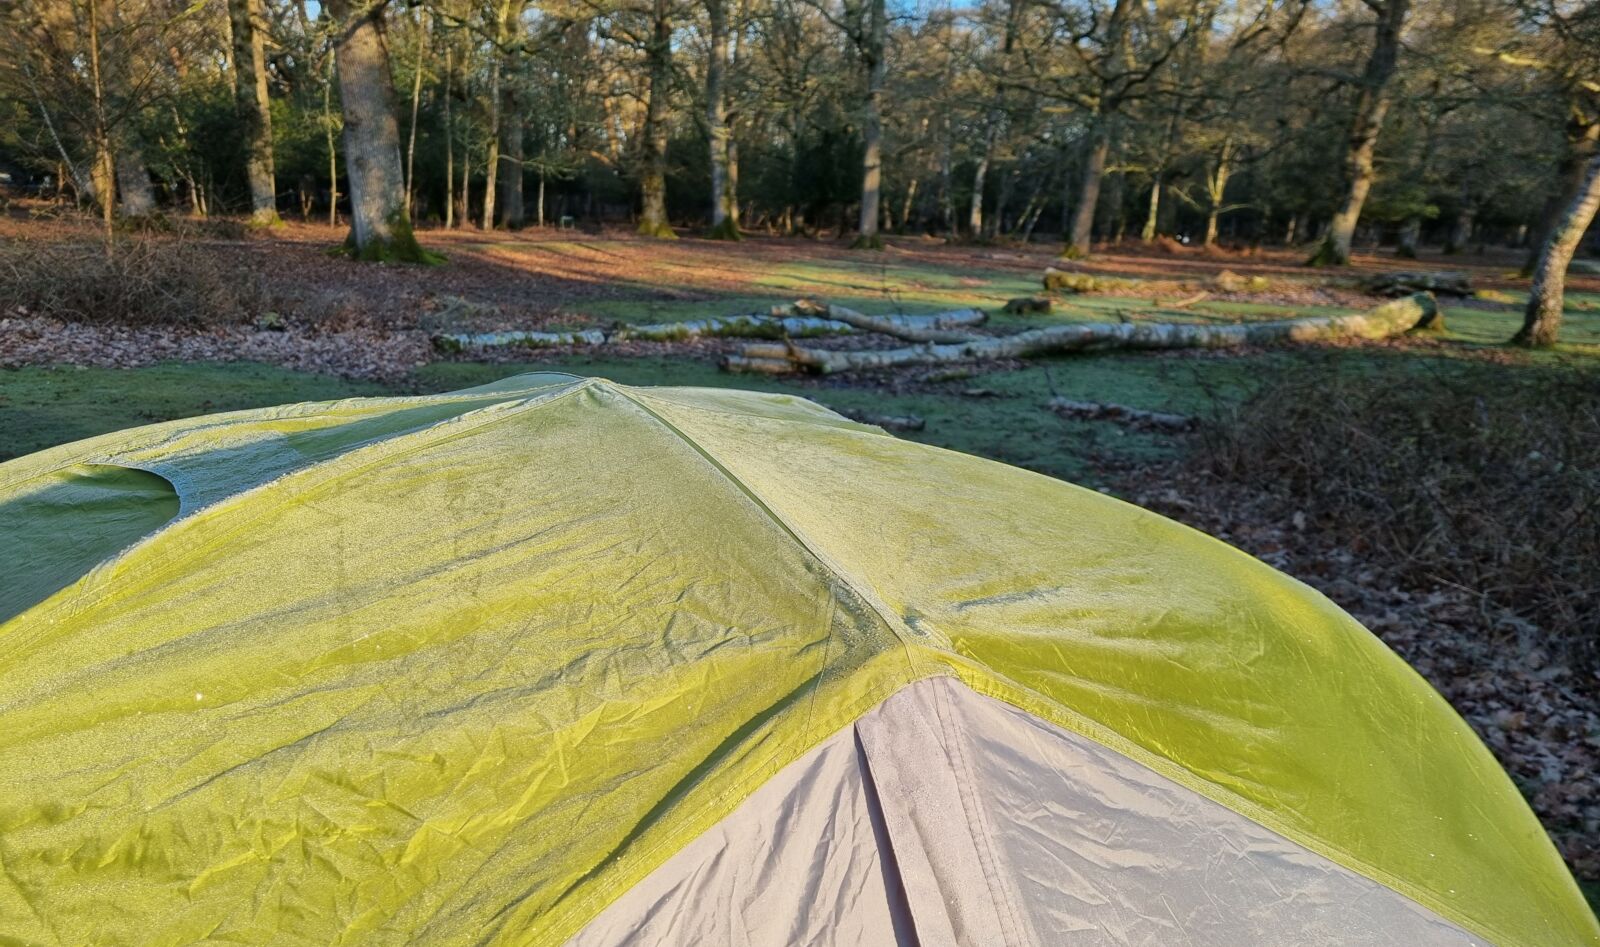 Tent in forest covered in frost